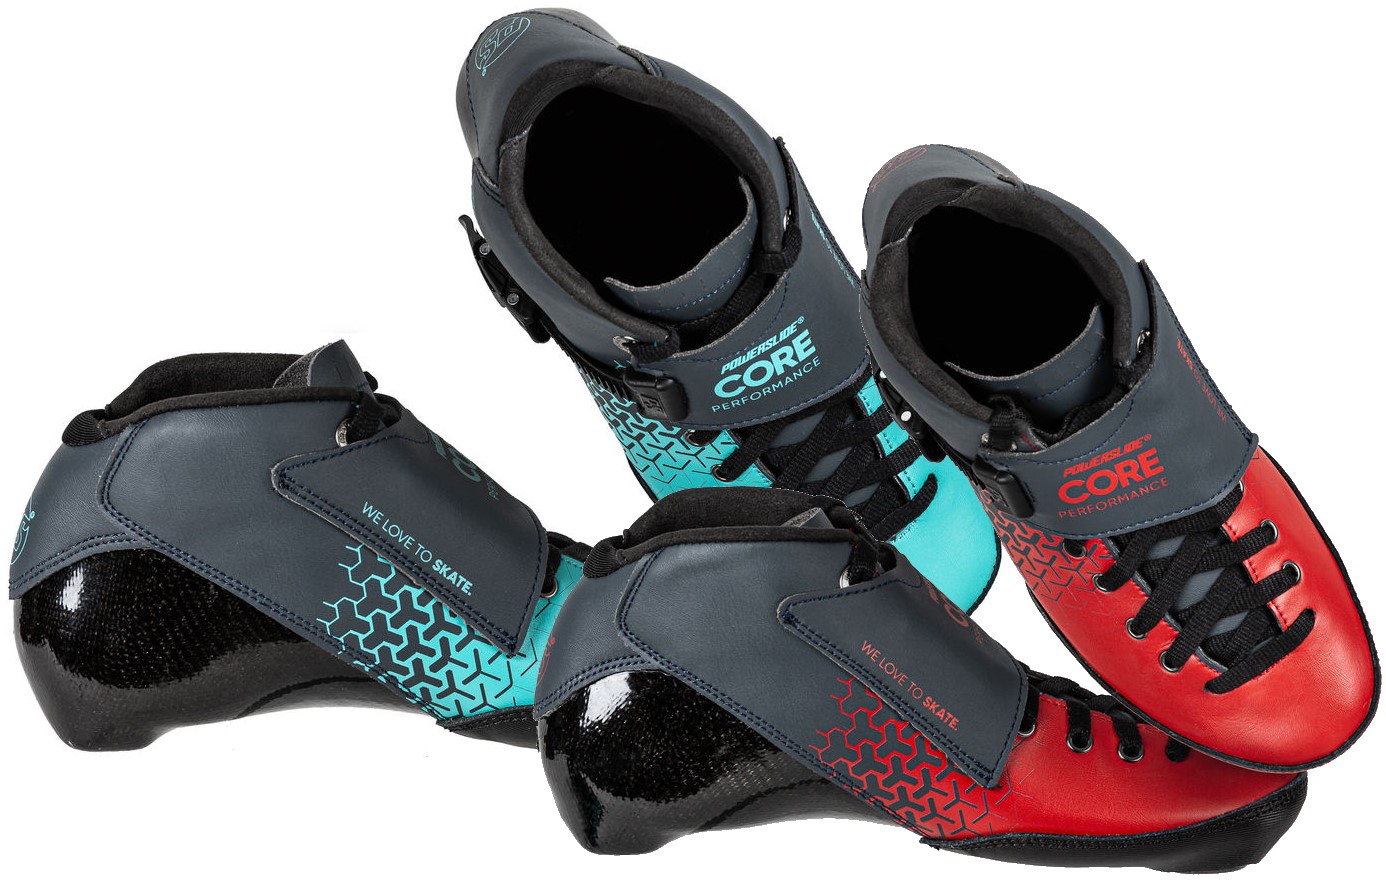 Powerslide Core Performance Race inline skate boot in red or teal colour for adults